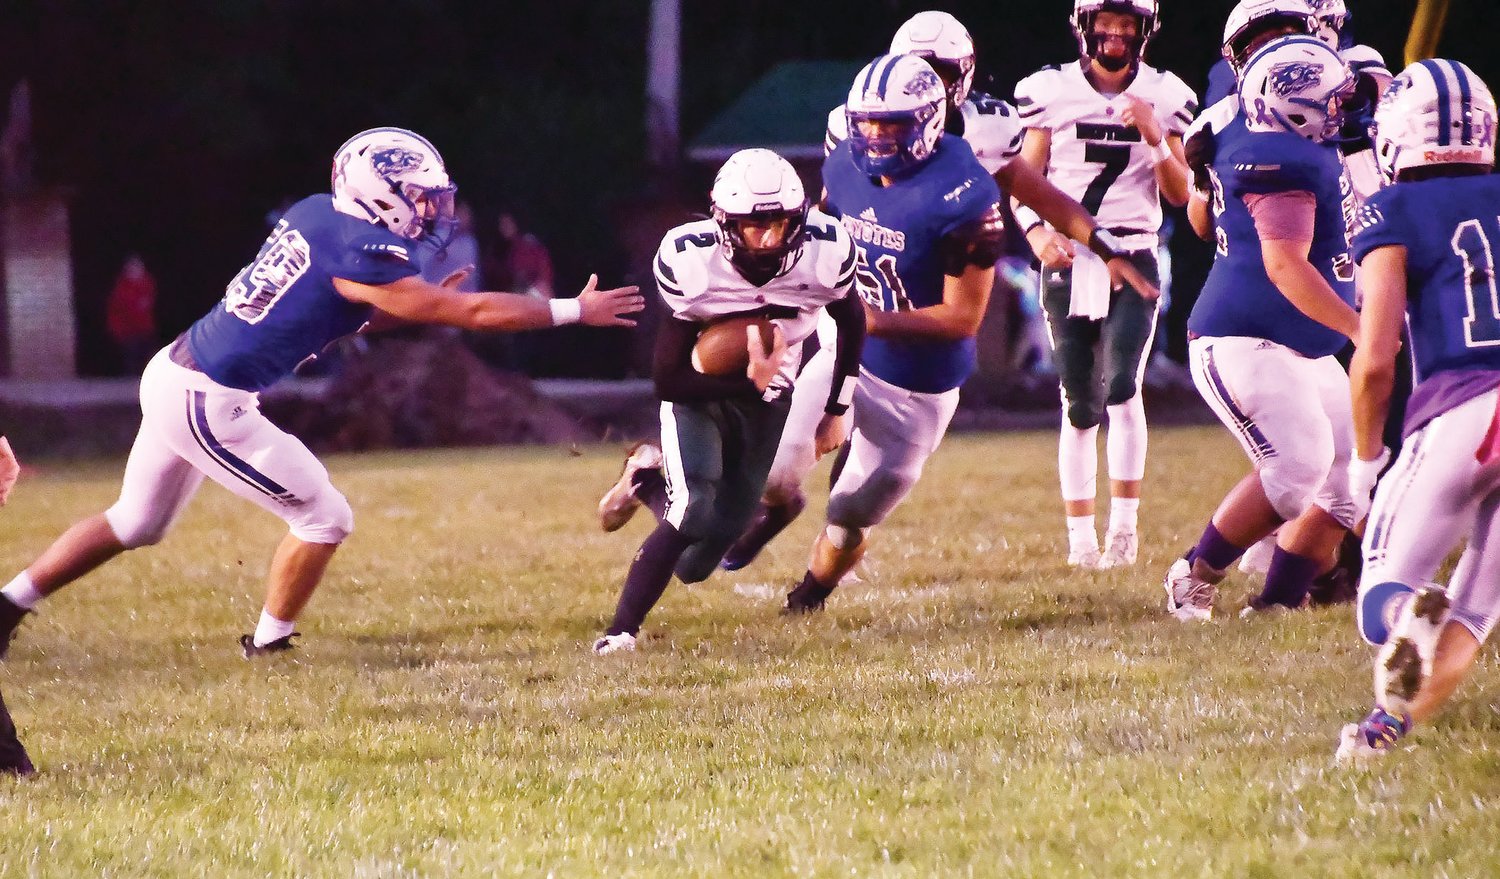 Westran's Nathaniel Kribbs bursts through to the second level on a big gain during Friday's game. Kribbs later scored a TD on an 83-yard kickoff return.